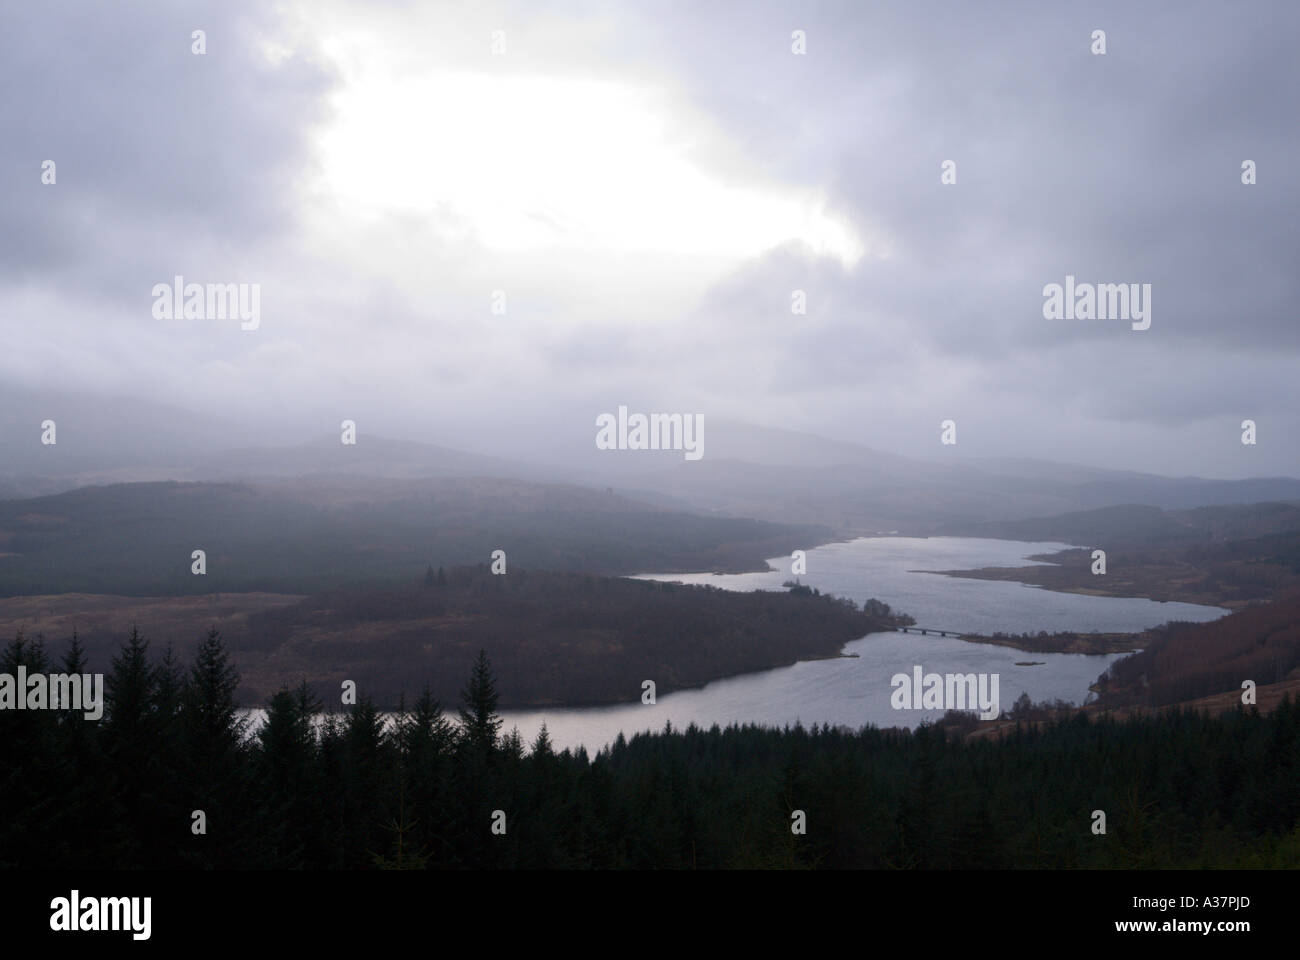 The shape of Loch Garry on the road north from Invergarry appears like the map of Scotland under a typical stormy winter sky Stock Photo